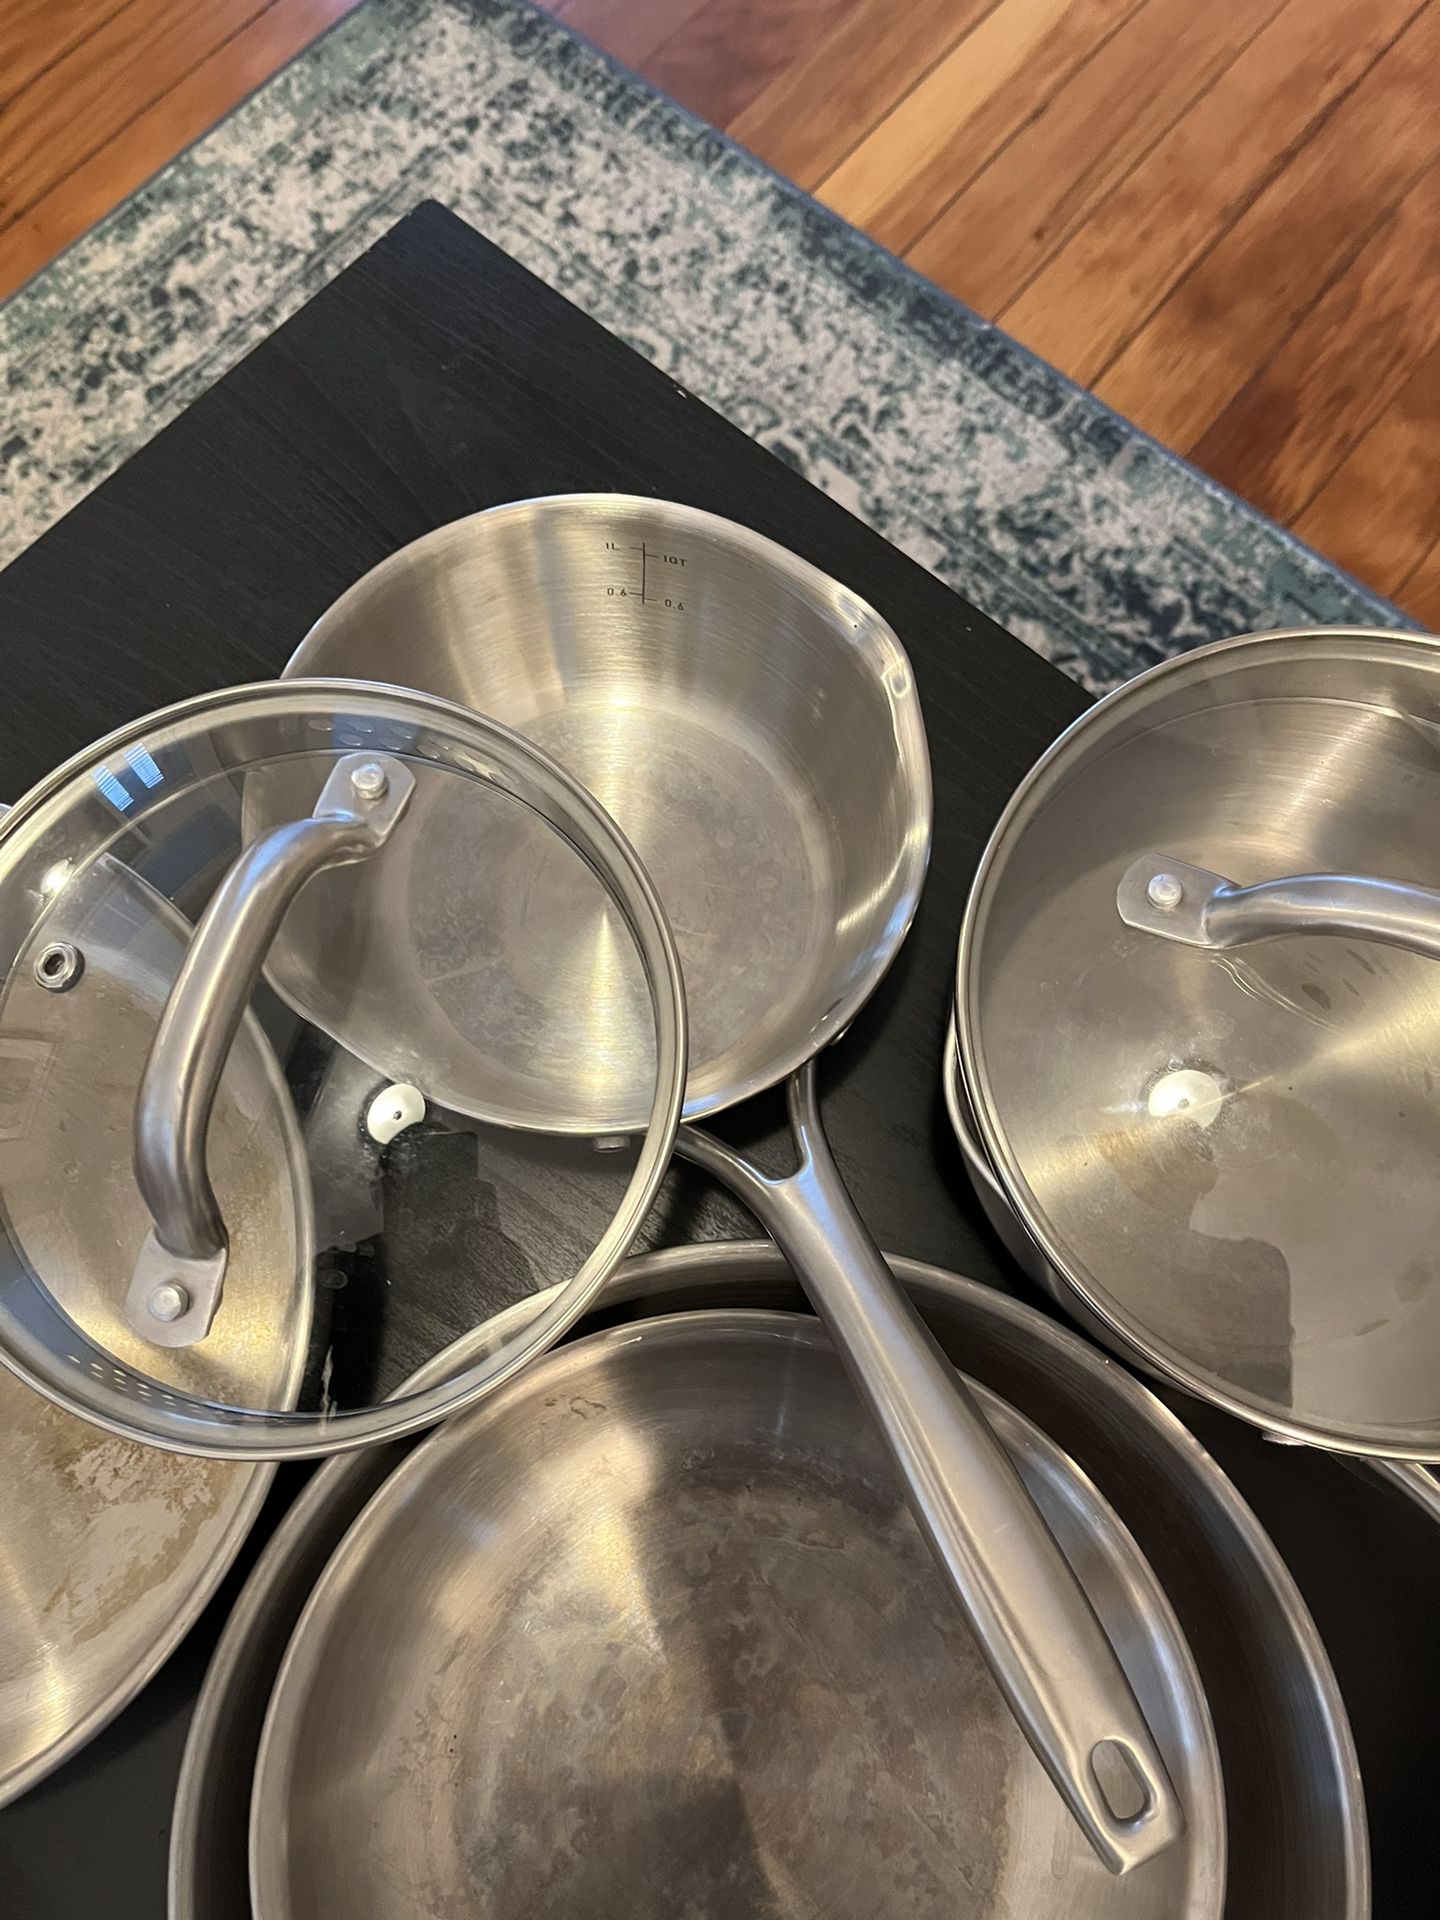 Thomas Rosenthal Group Professional Cookware Saute Pan for Sale in Norwalk,  CA - OfferUp